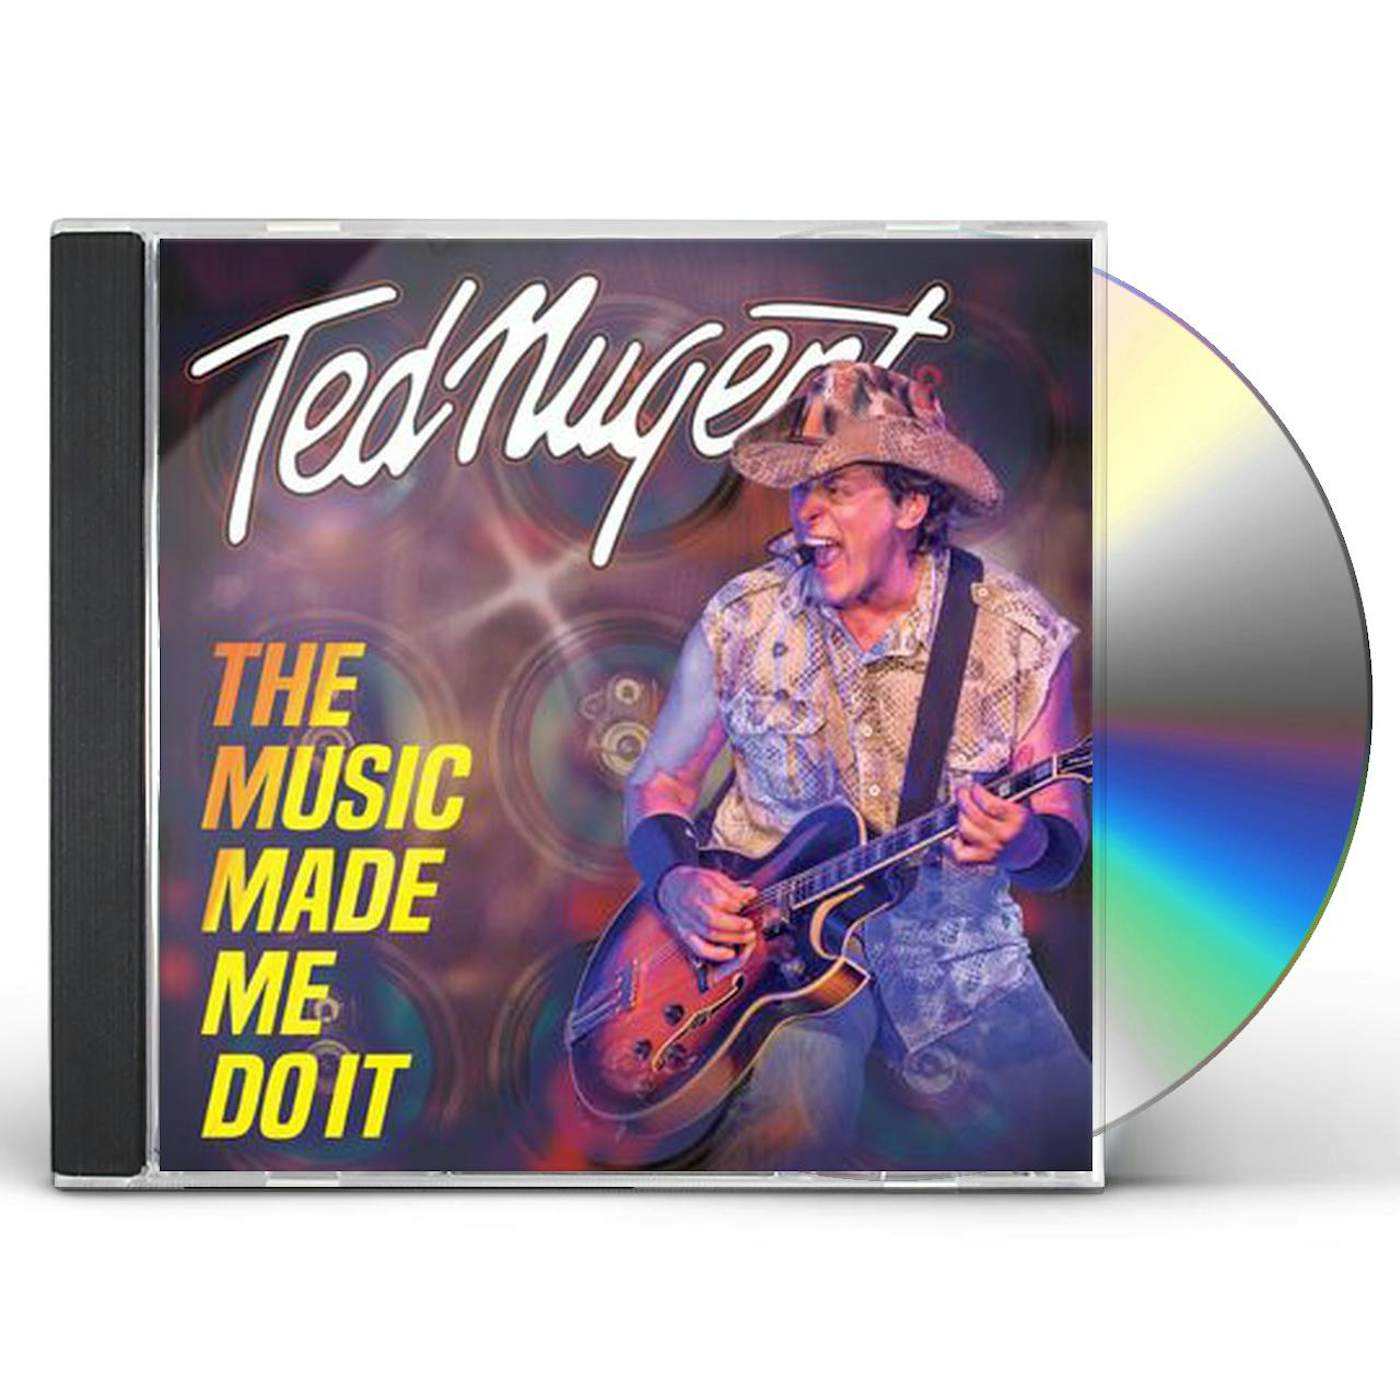 Ted Nugent MUSIC MADE ME DO IT CD